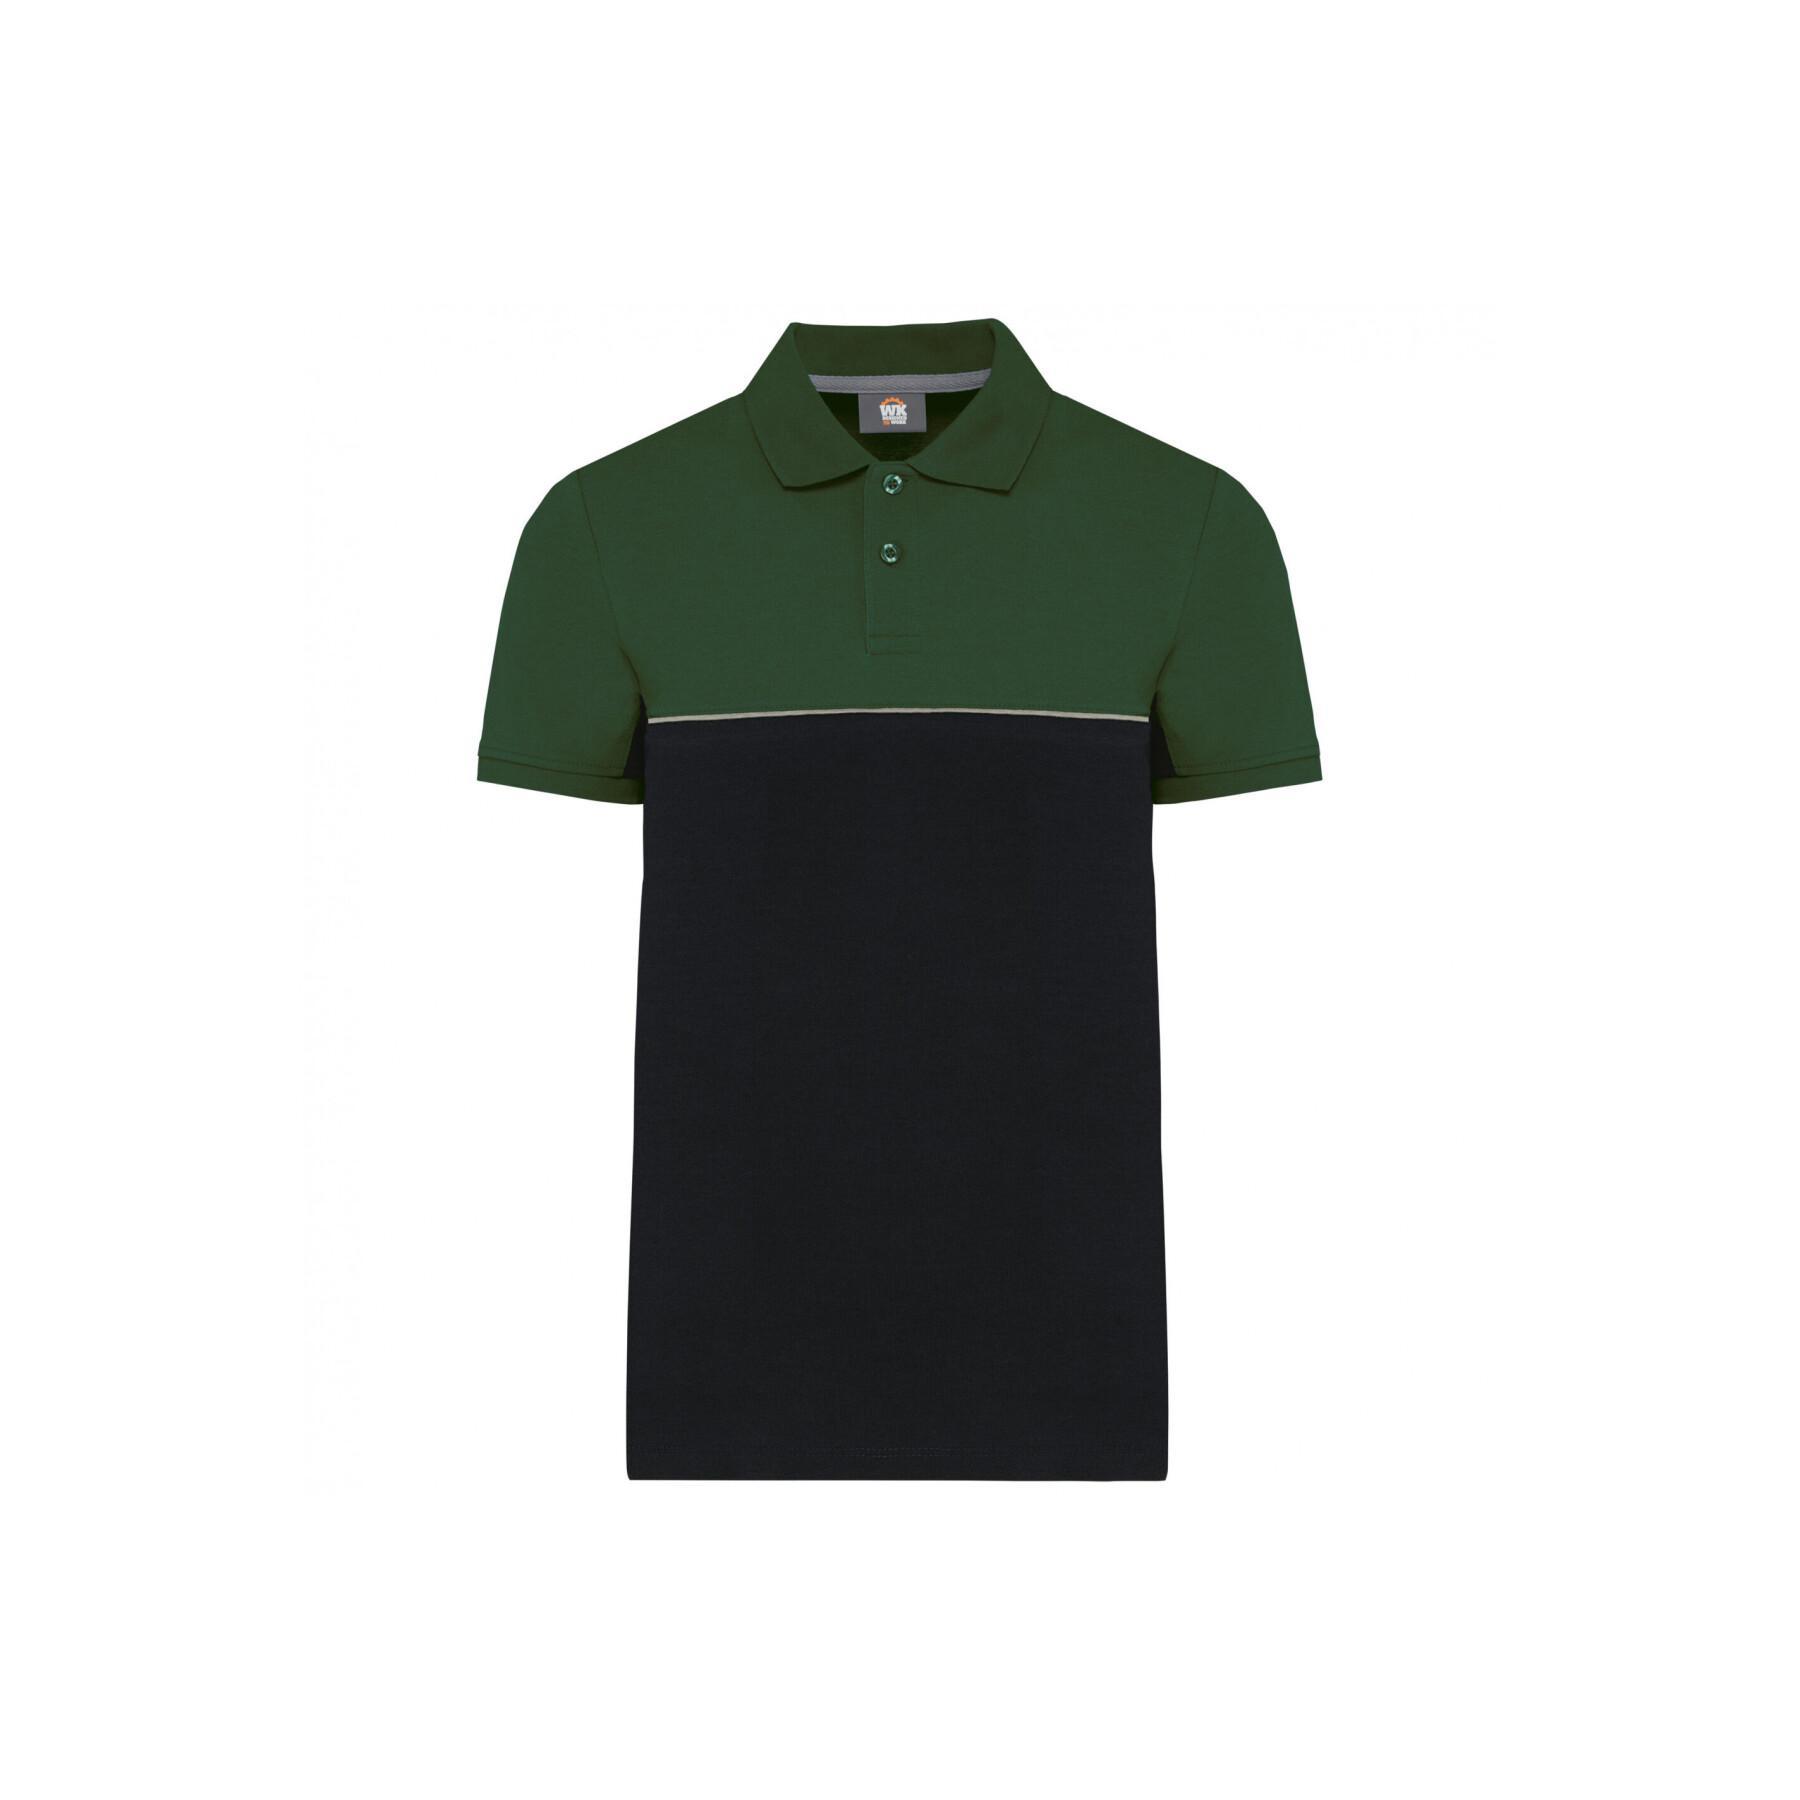 Two-tone polo WK. Designed To Work